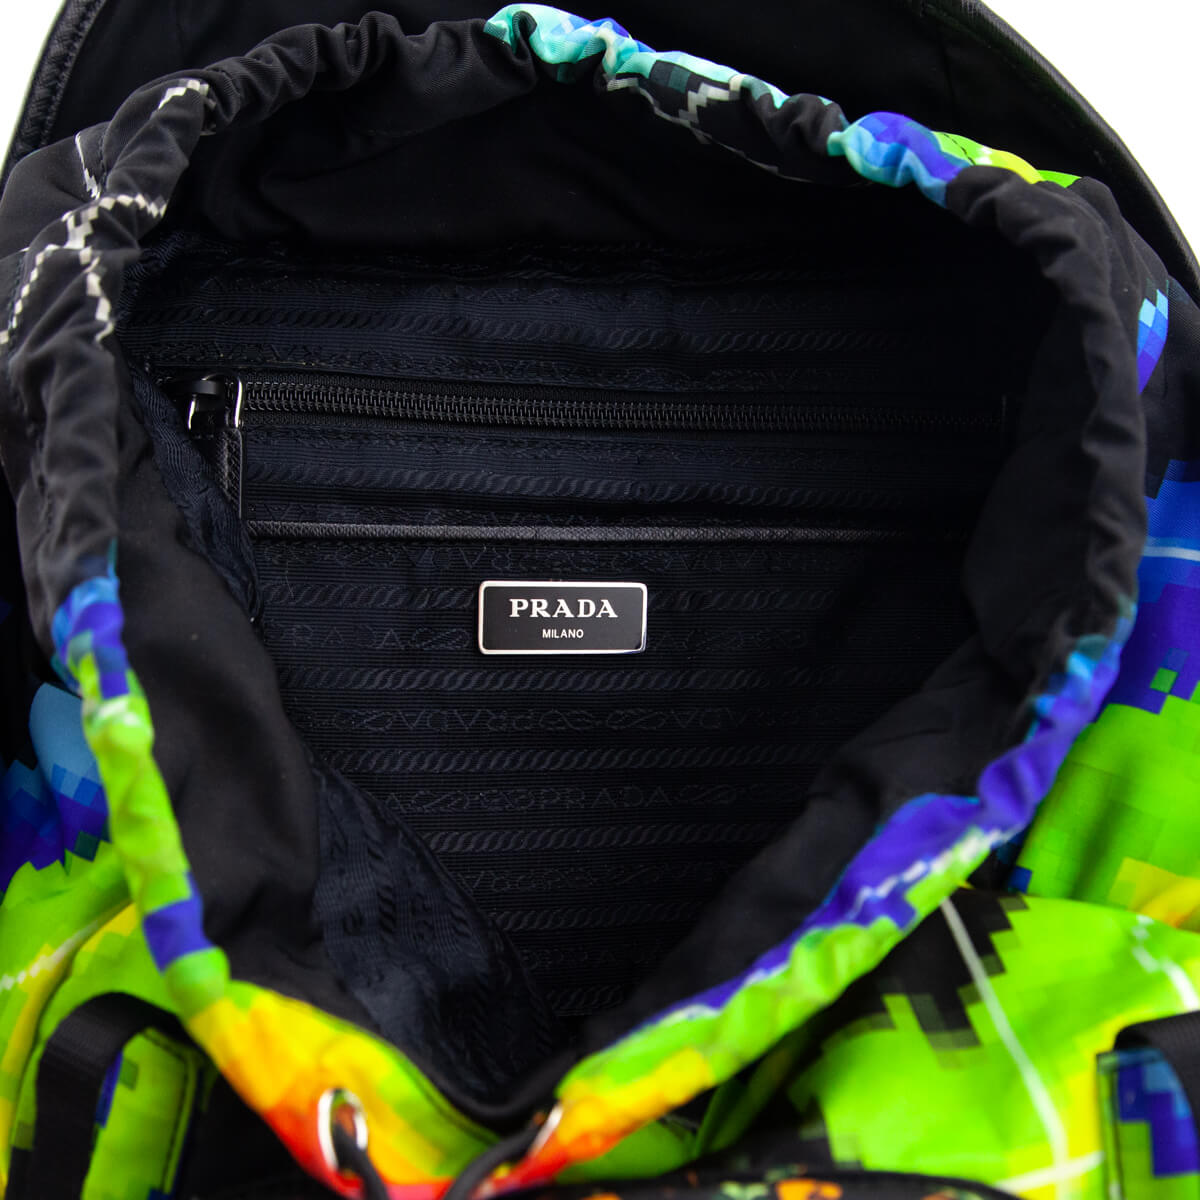 Prada Multicolor Printed Nylon Double Buckle Backpack - Love that Bag etc - Preowned Authentic Designer Handbags & Preloved Fashions